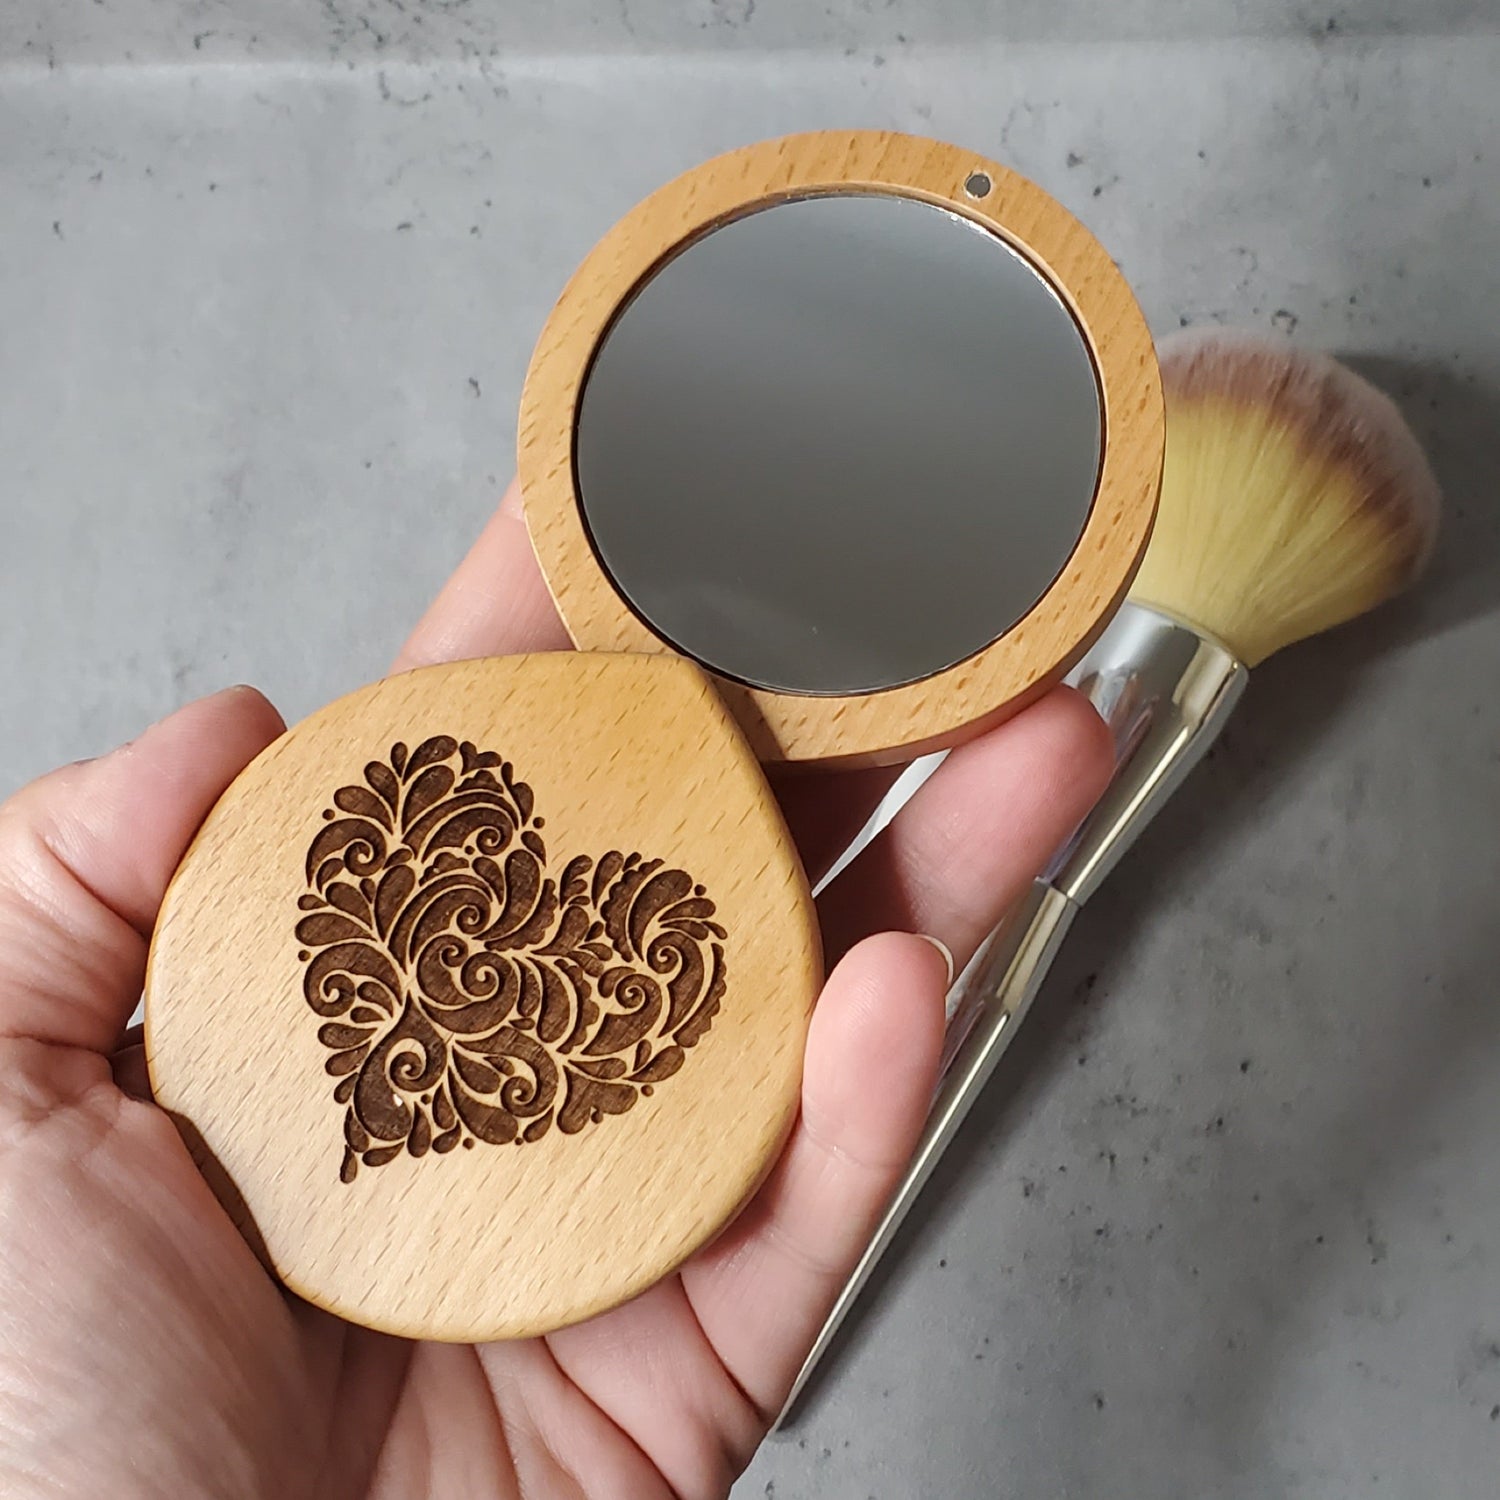 Small mirror fits into little girls hands as well, made of maple wood and it has a heart engraved on the front